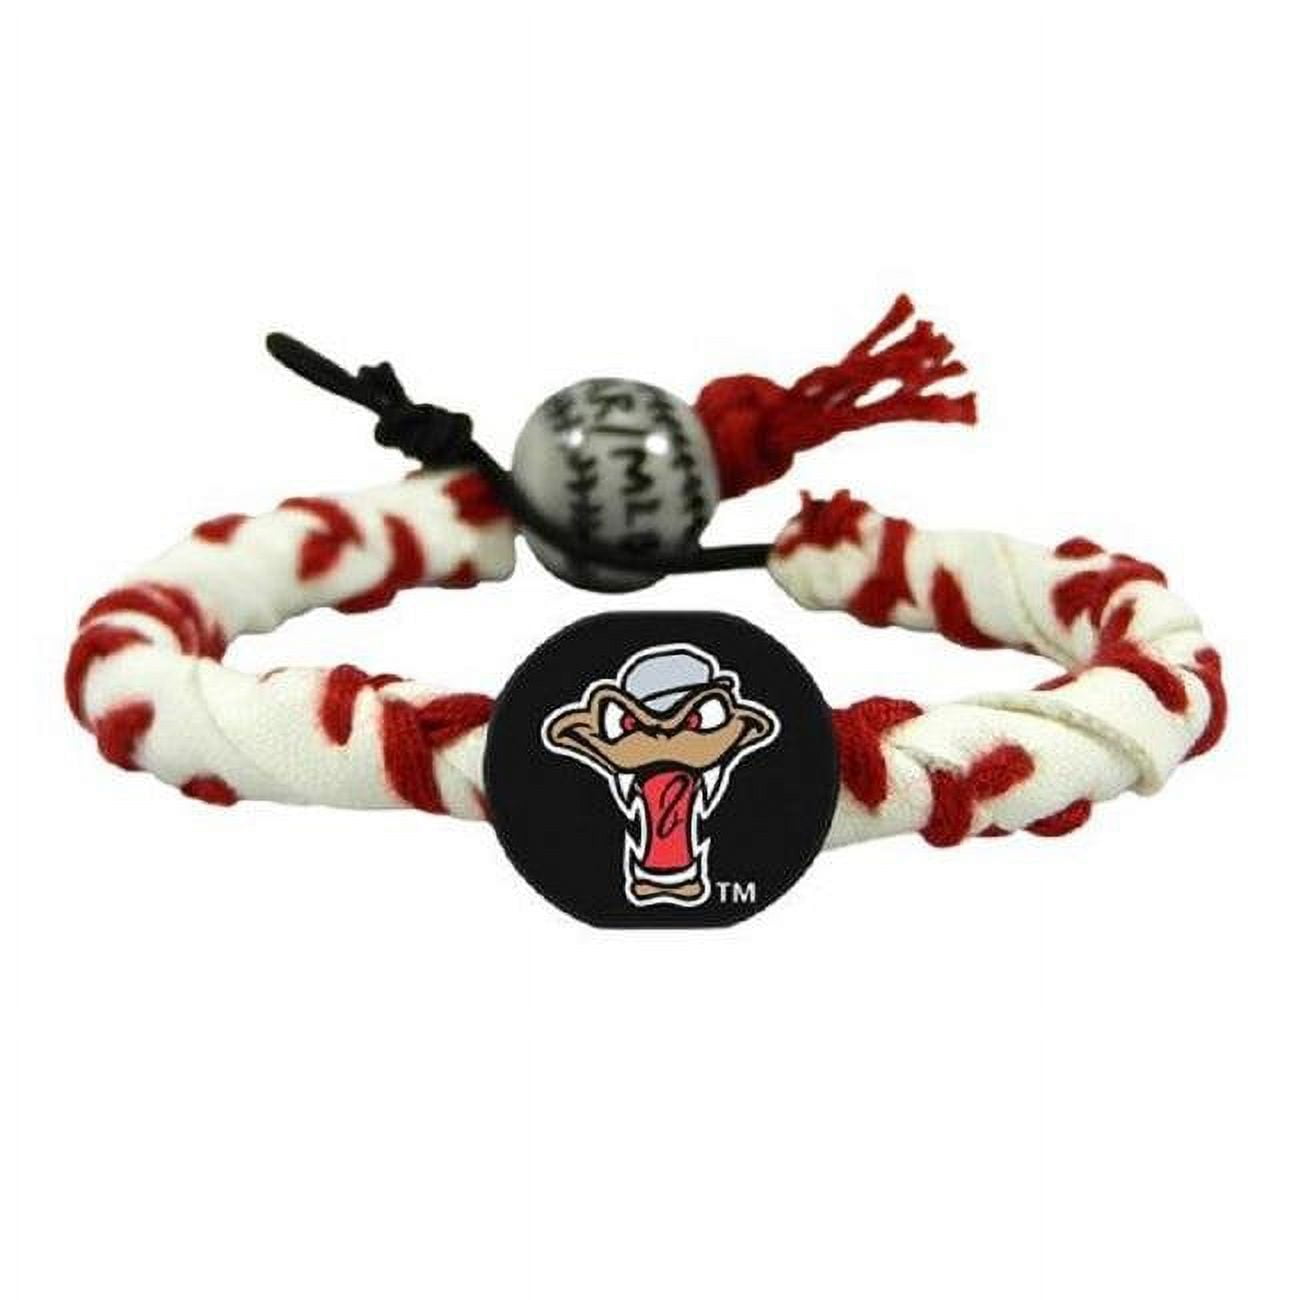 Picture of Gamewear 4421408223 Wisconsin Timber Rattlers Classic Baseball Bracelet Frozen Rope